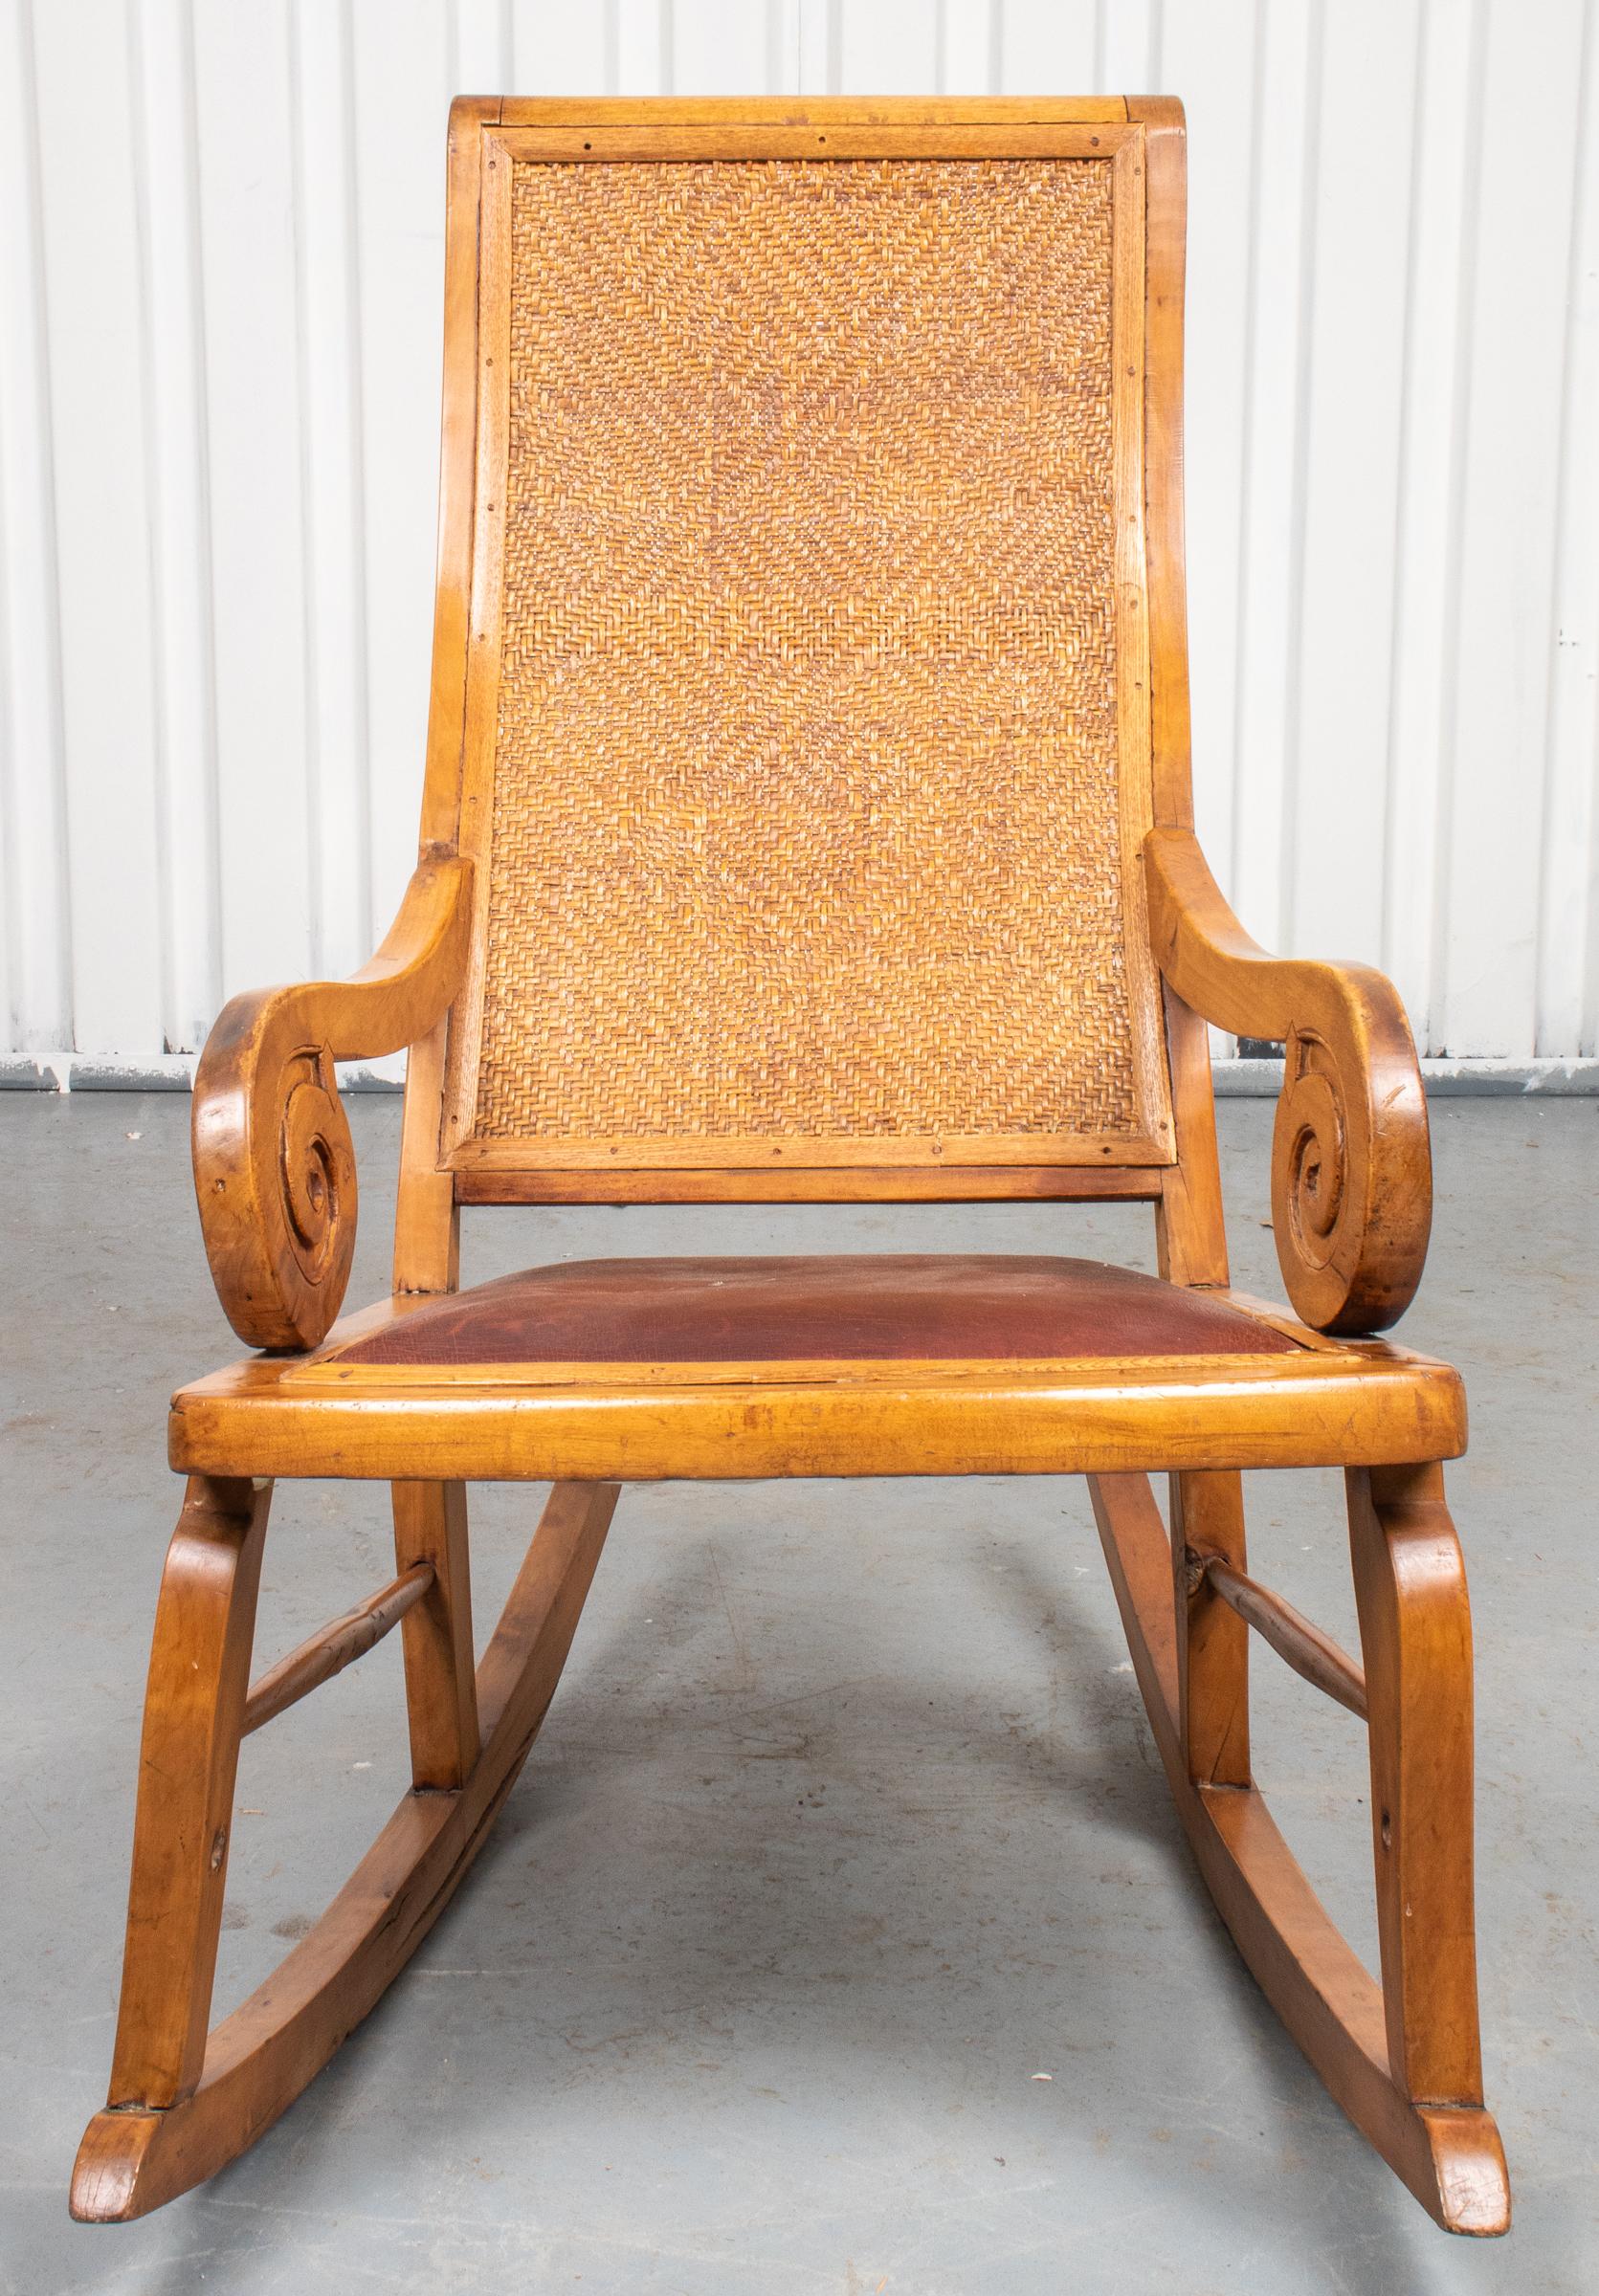 old rocking chair with leather seat